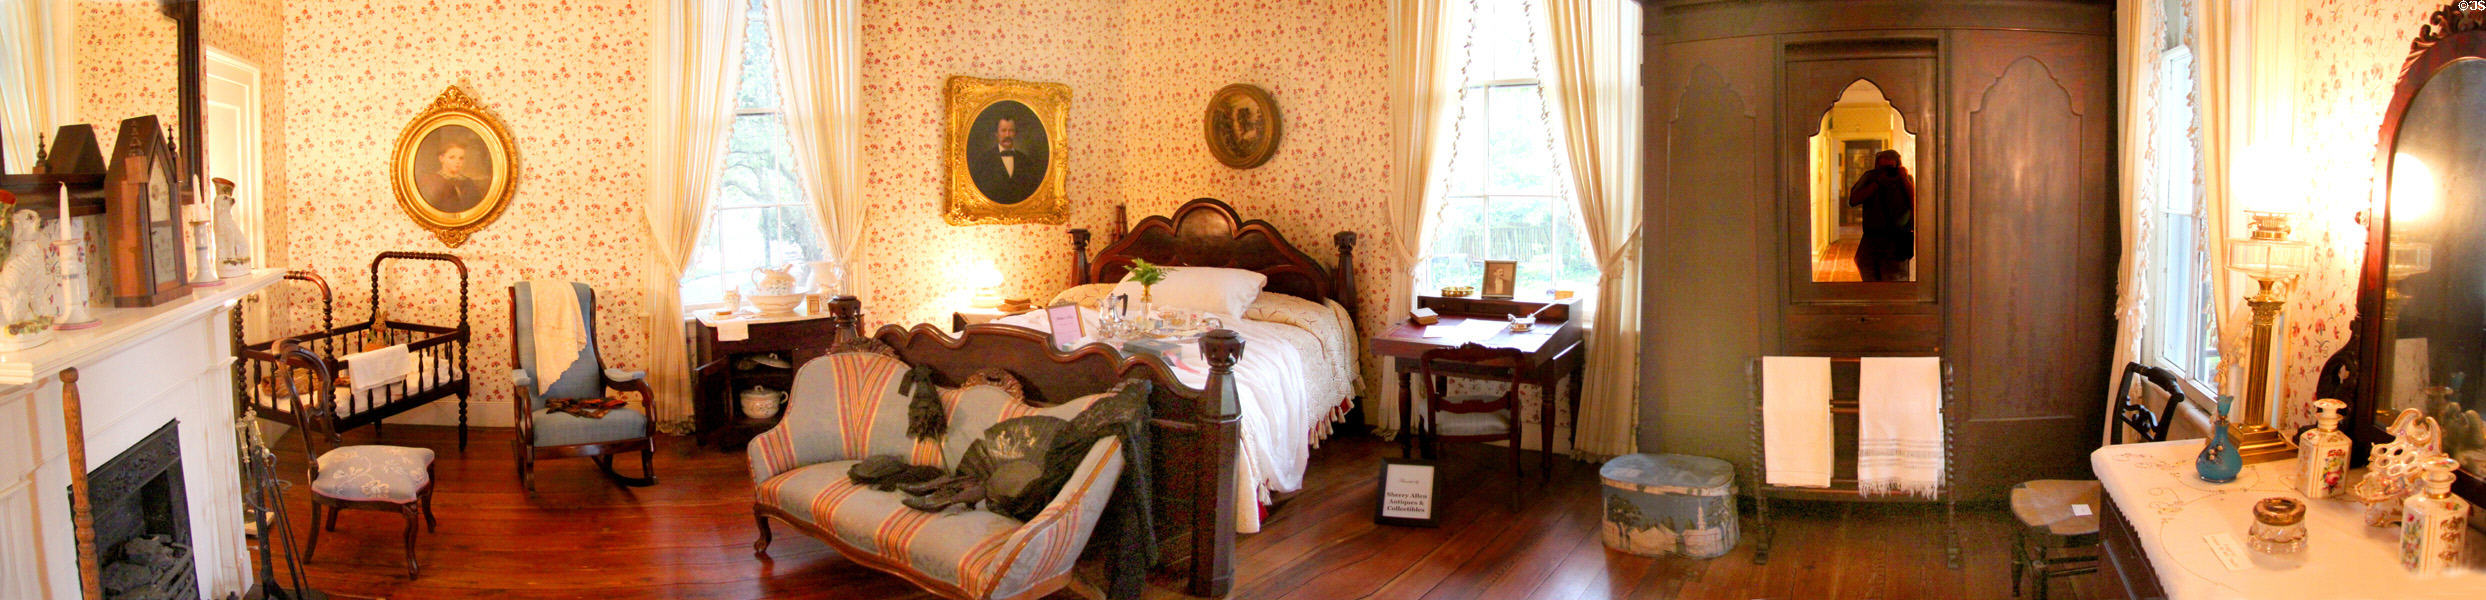 Bedroom panorama at Oakleigh Plantation. Mobile, AL.